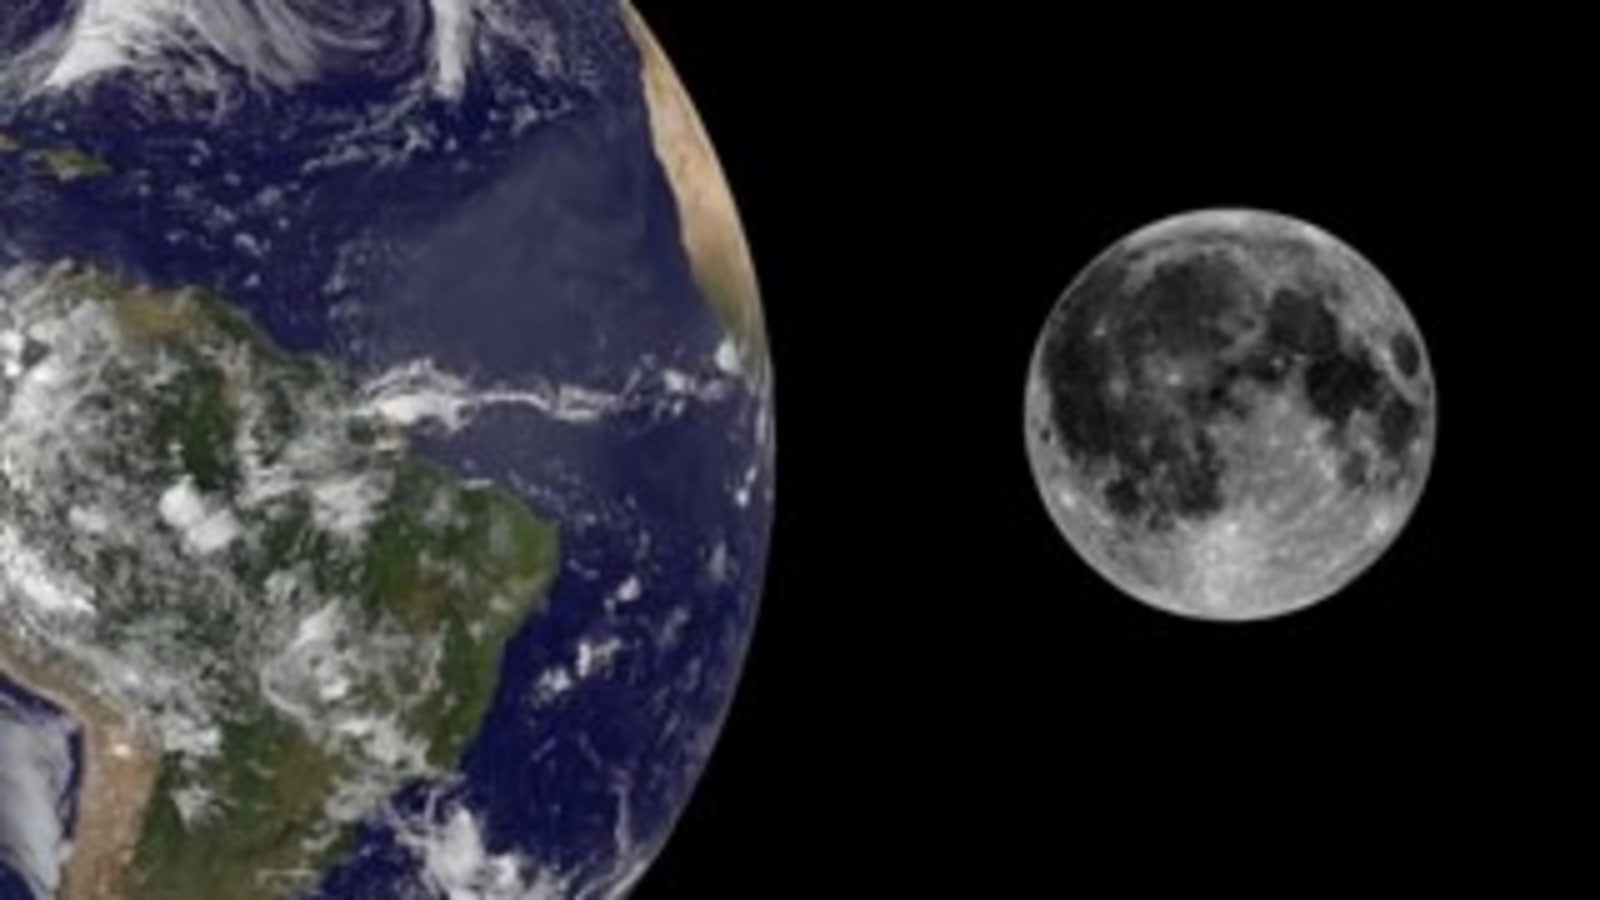 How the Moon's Gravity Influences Earth